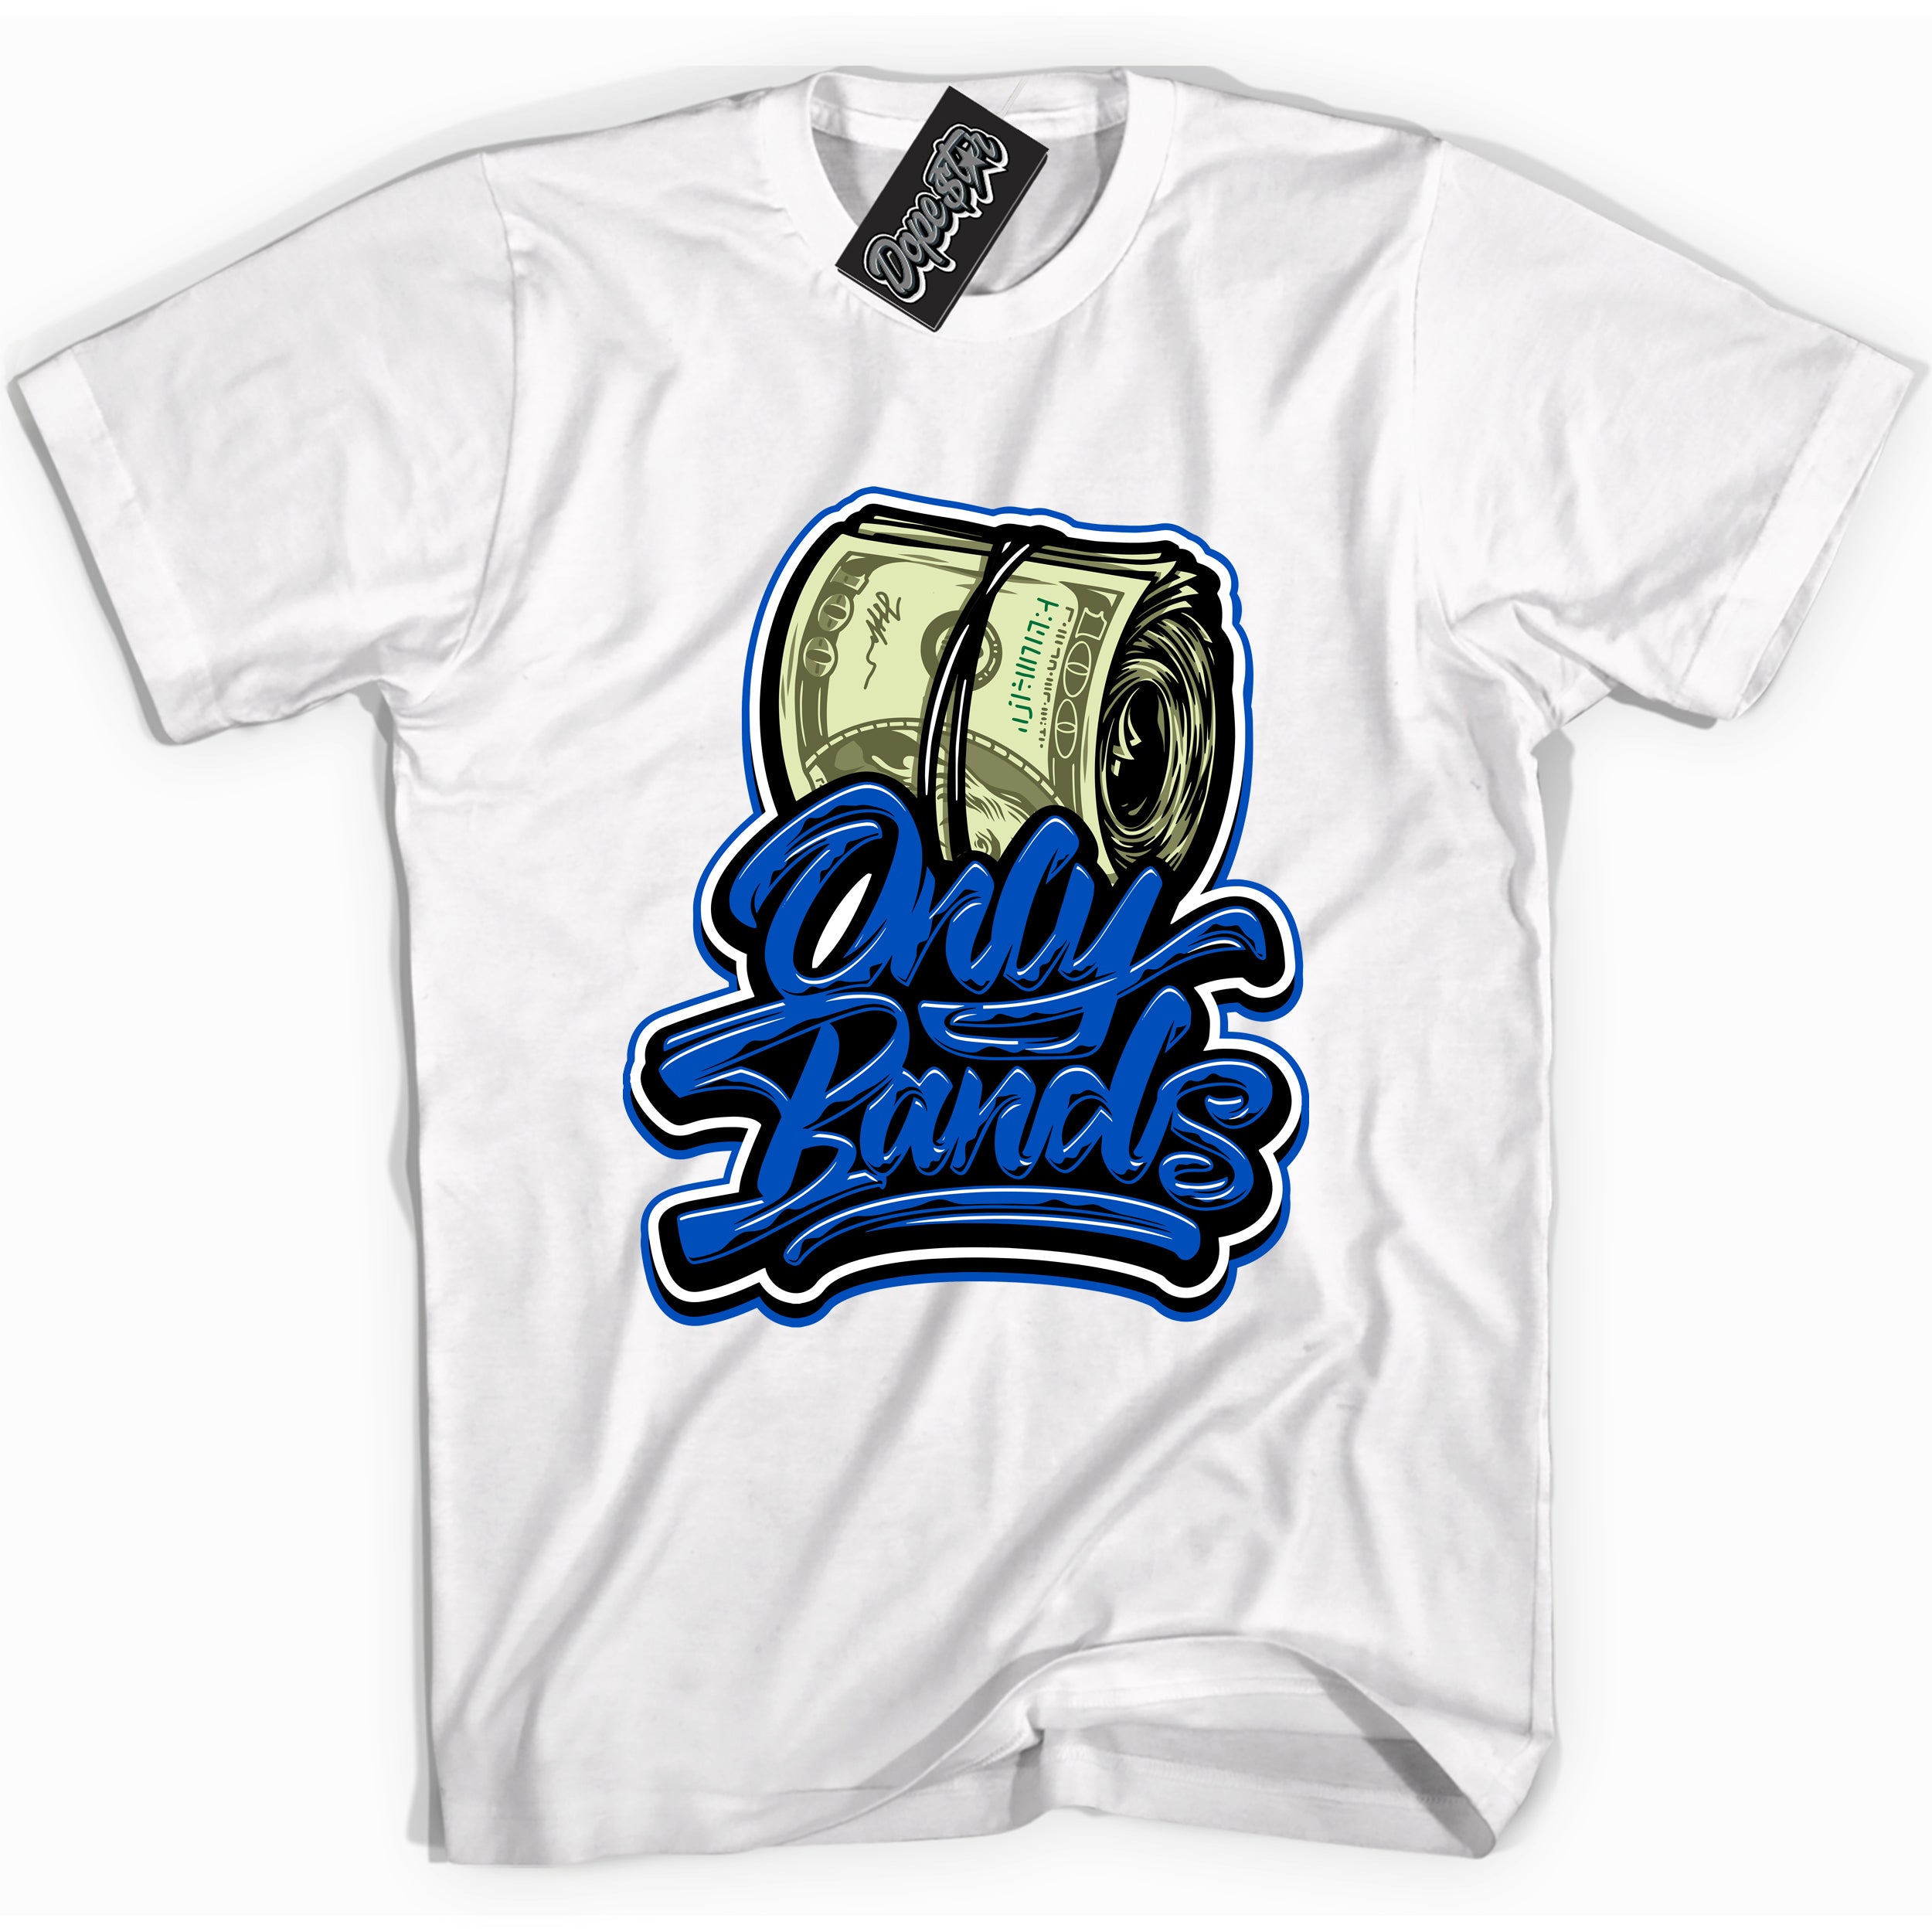 Cool White graphic tee with "Only Bands" design, that perfectly matches Royal Reimagined 1s sneakers 